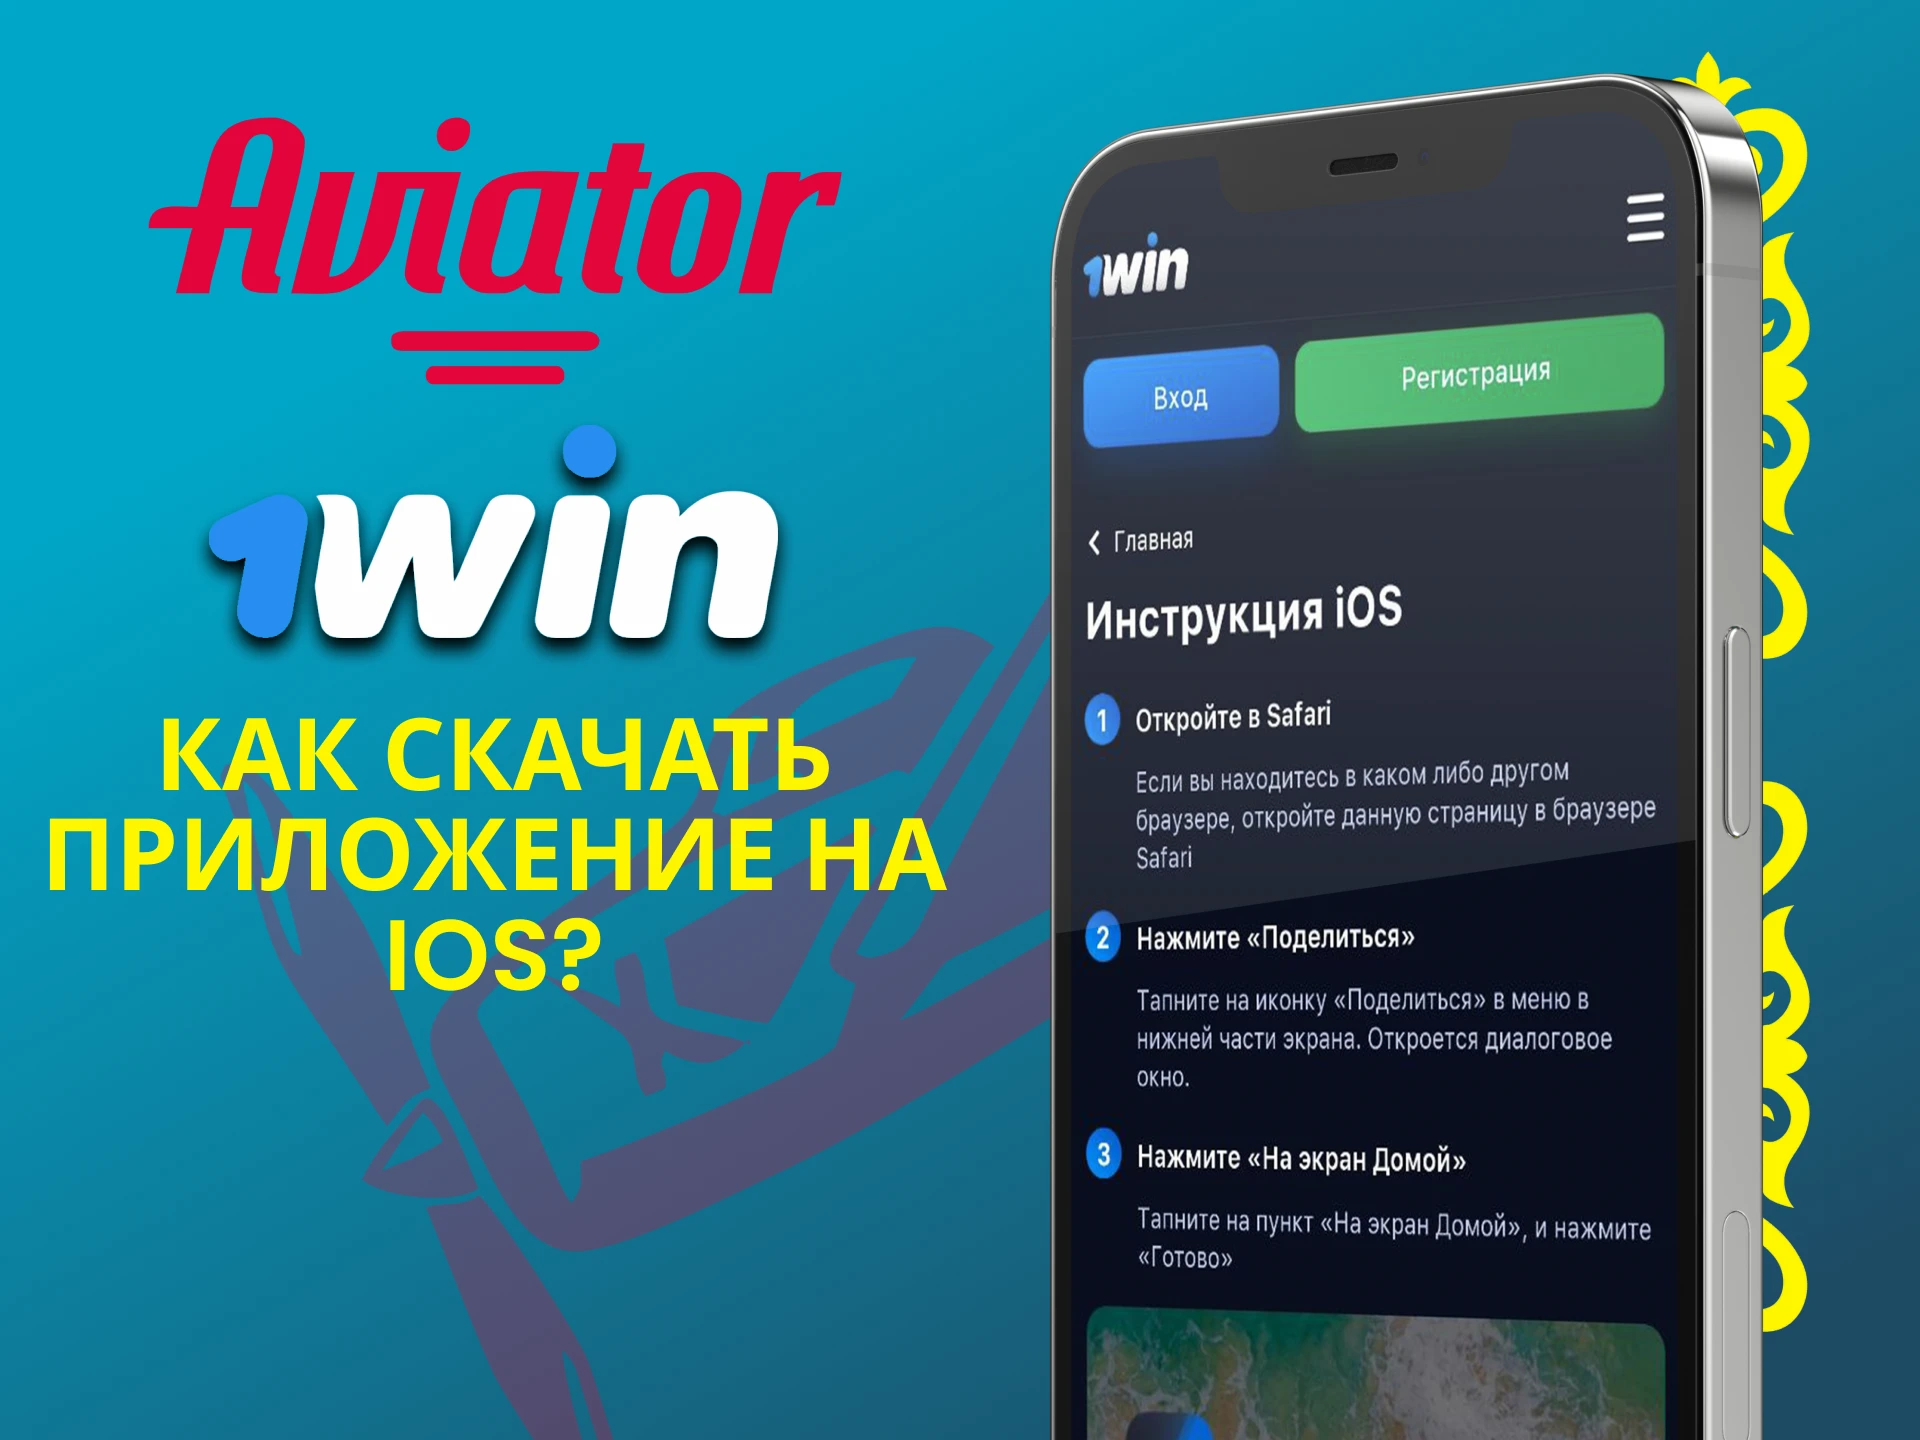 We will tell you how to download the 1win application for iOS.